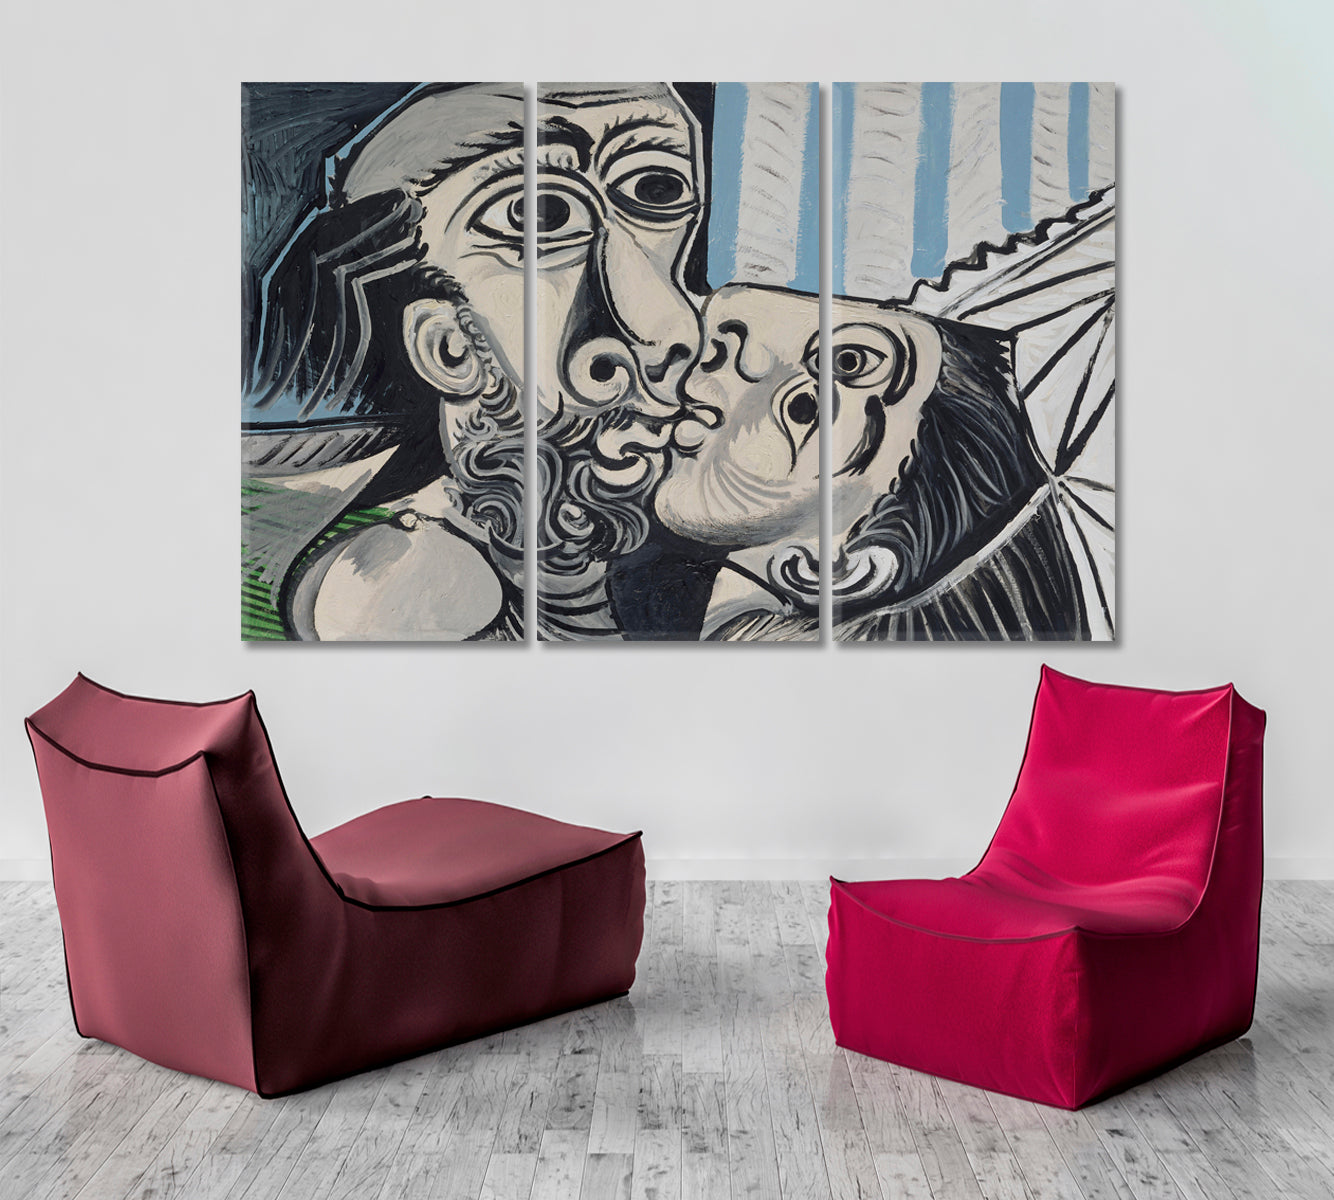 KISS Abstract Cubism Picasso Style Poster Fine Art Artesty 3 panels 36" x 24" 